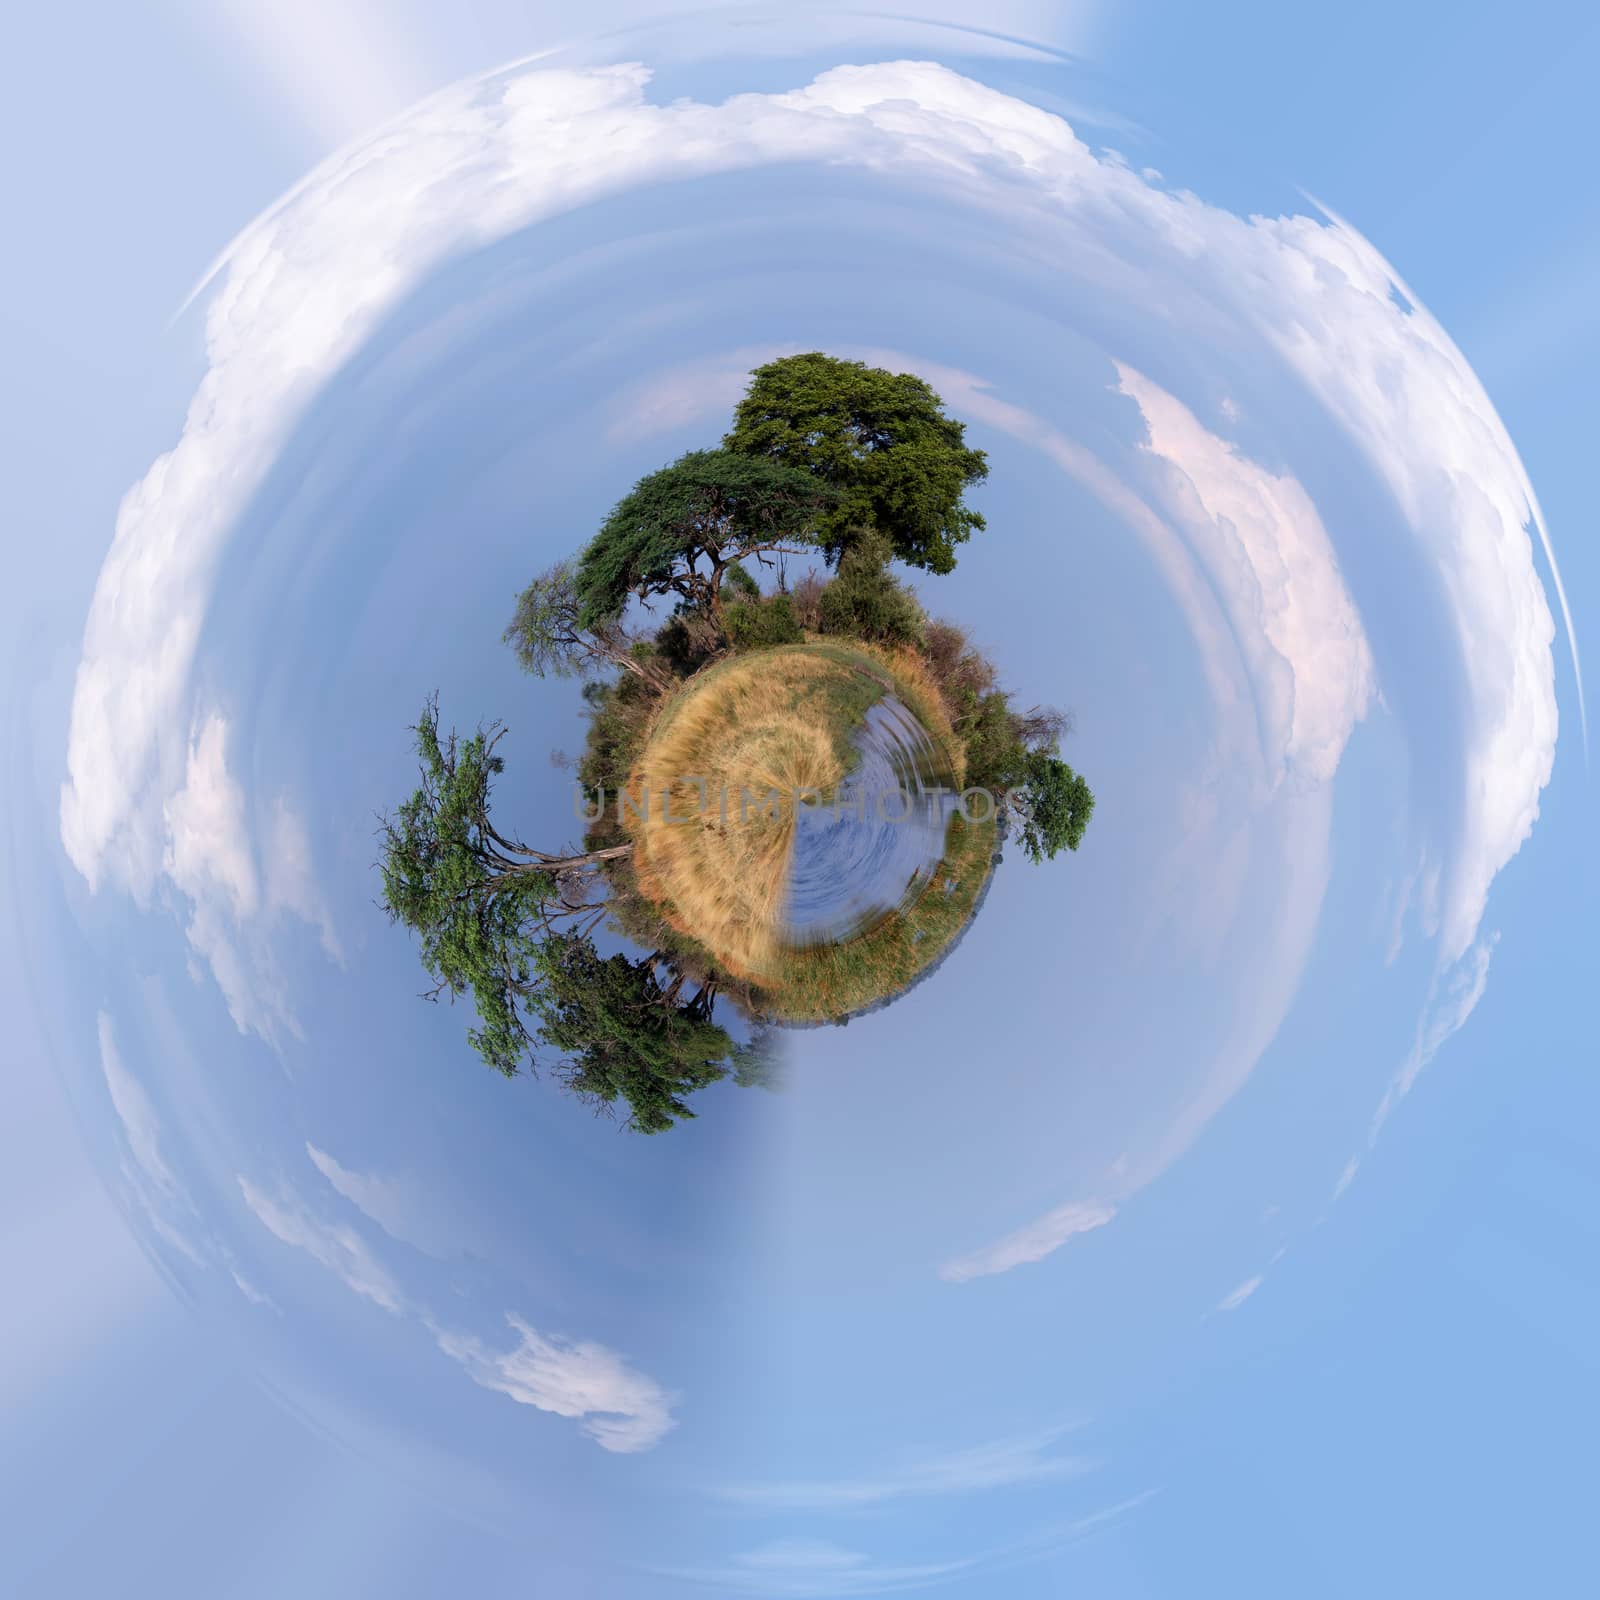 Beautiful Little planet of african landscape in national park nambwa on Caprivi Strip Namibia. Ecology concept. Save Africa nature project.Tiny green planet